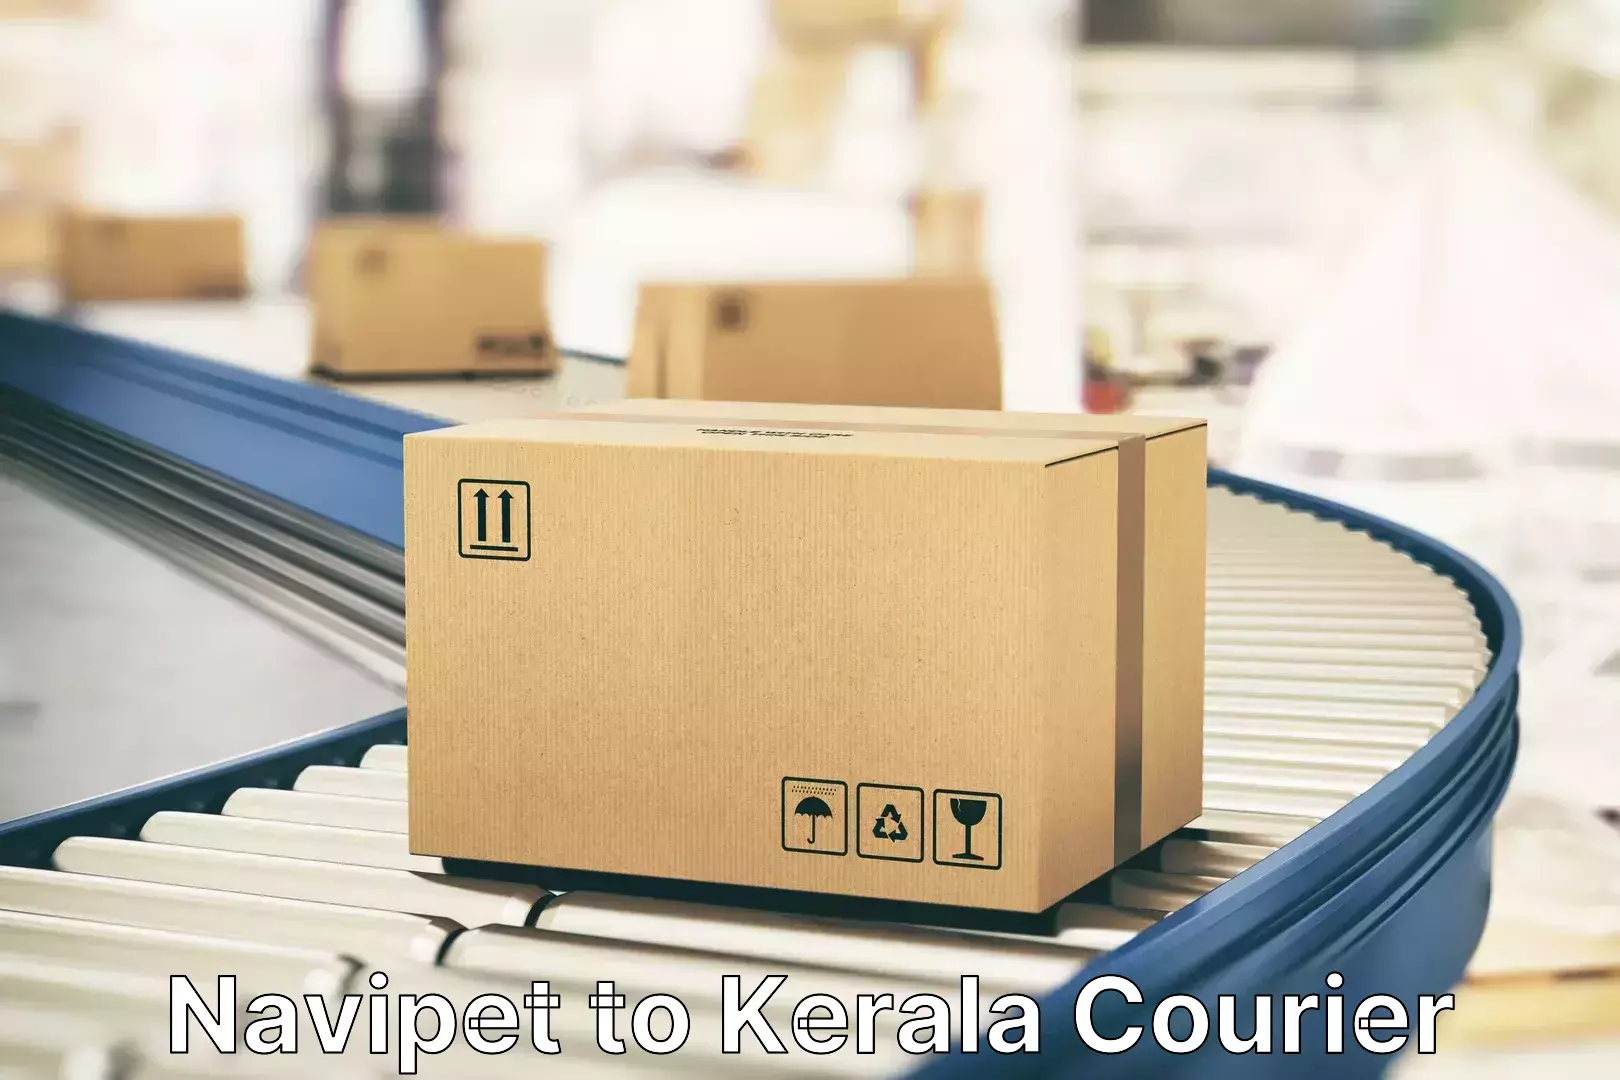 Fast track baggage delivery Navipet to Cochin University of Science and Technology